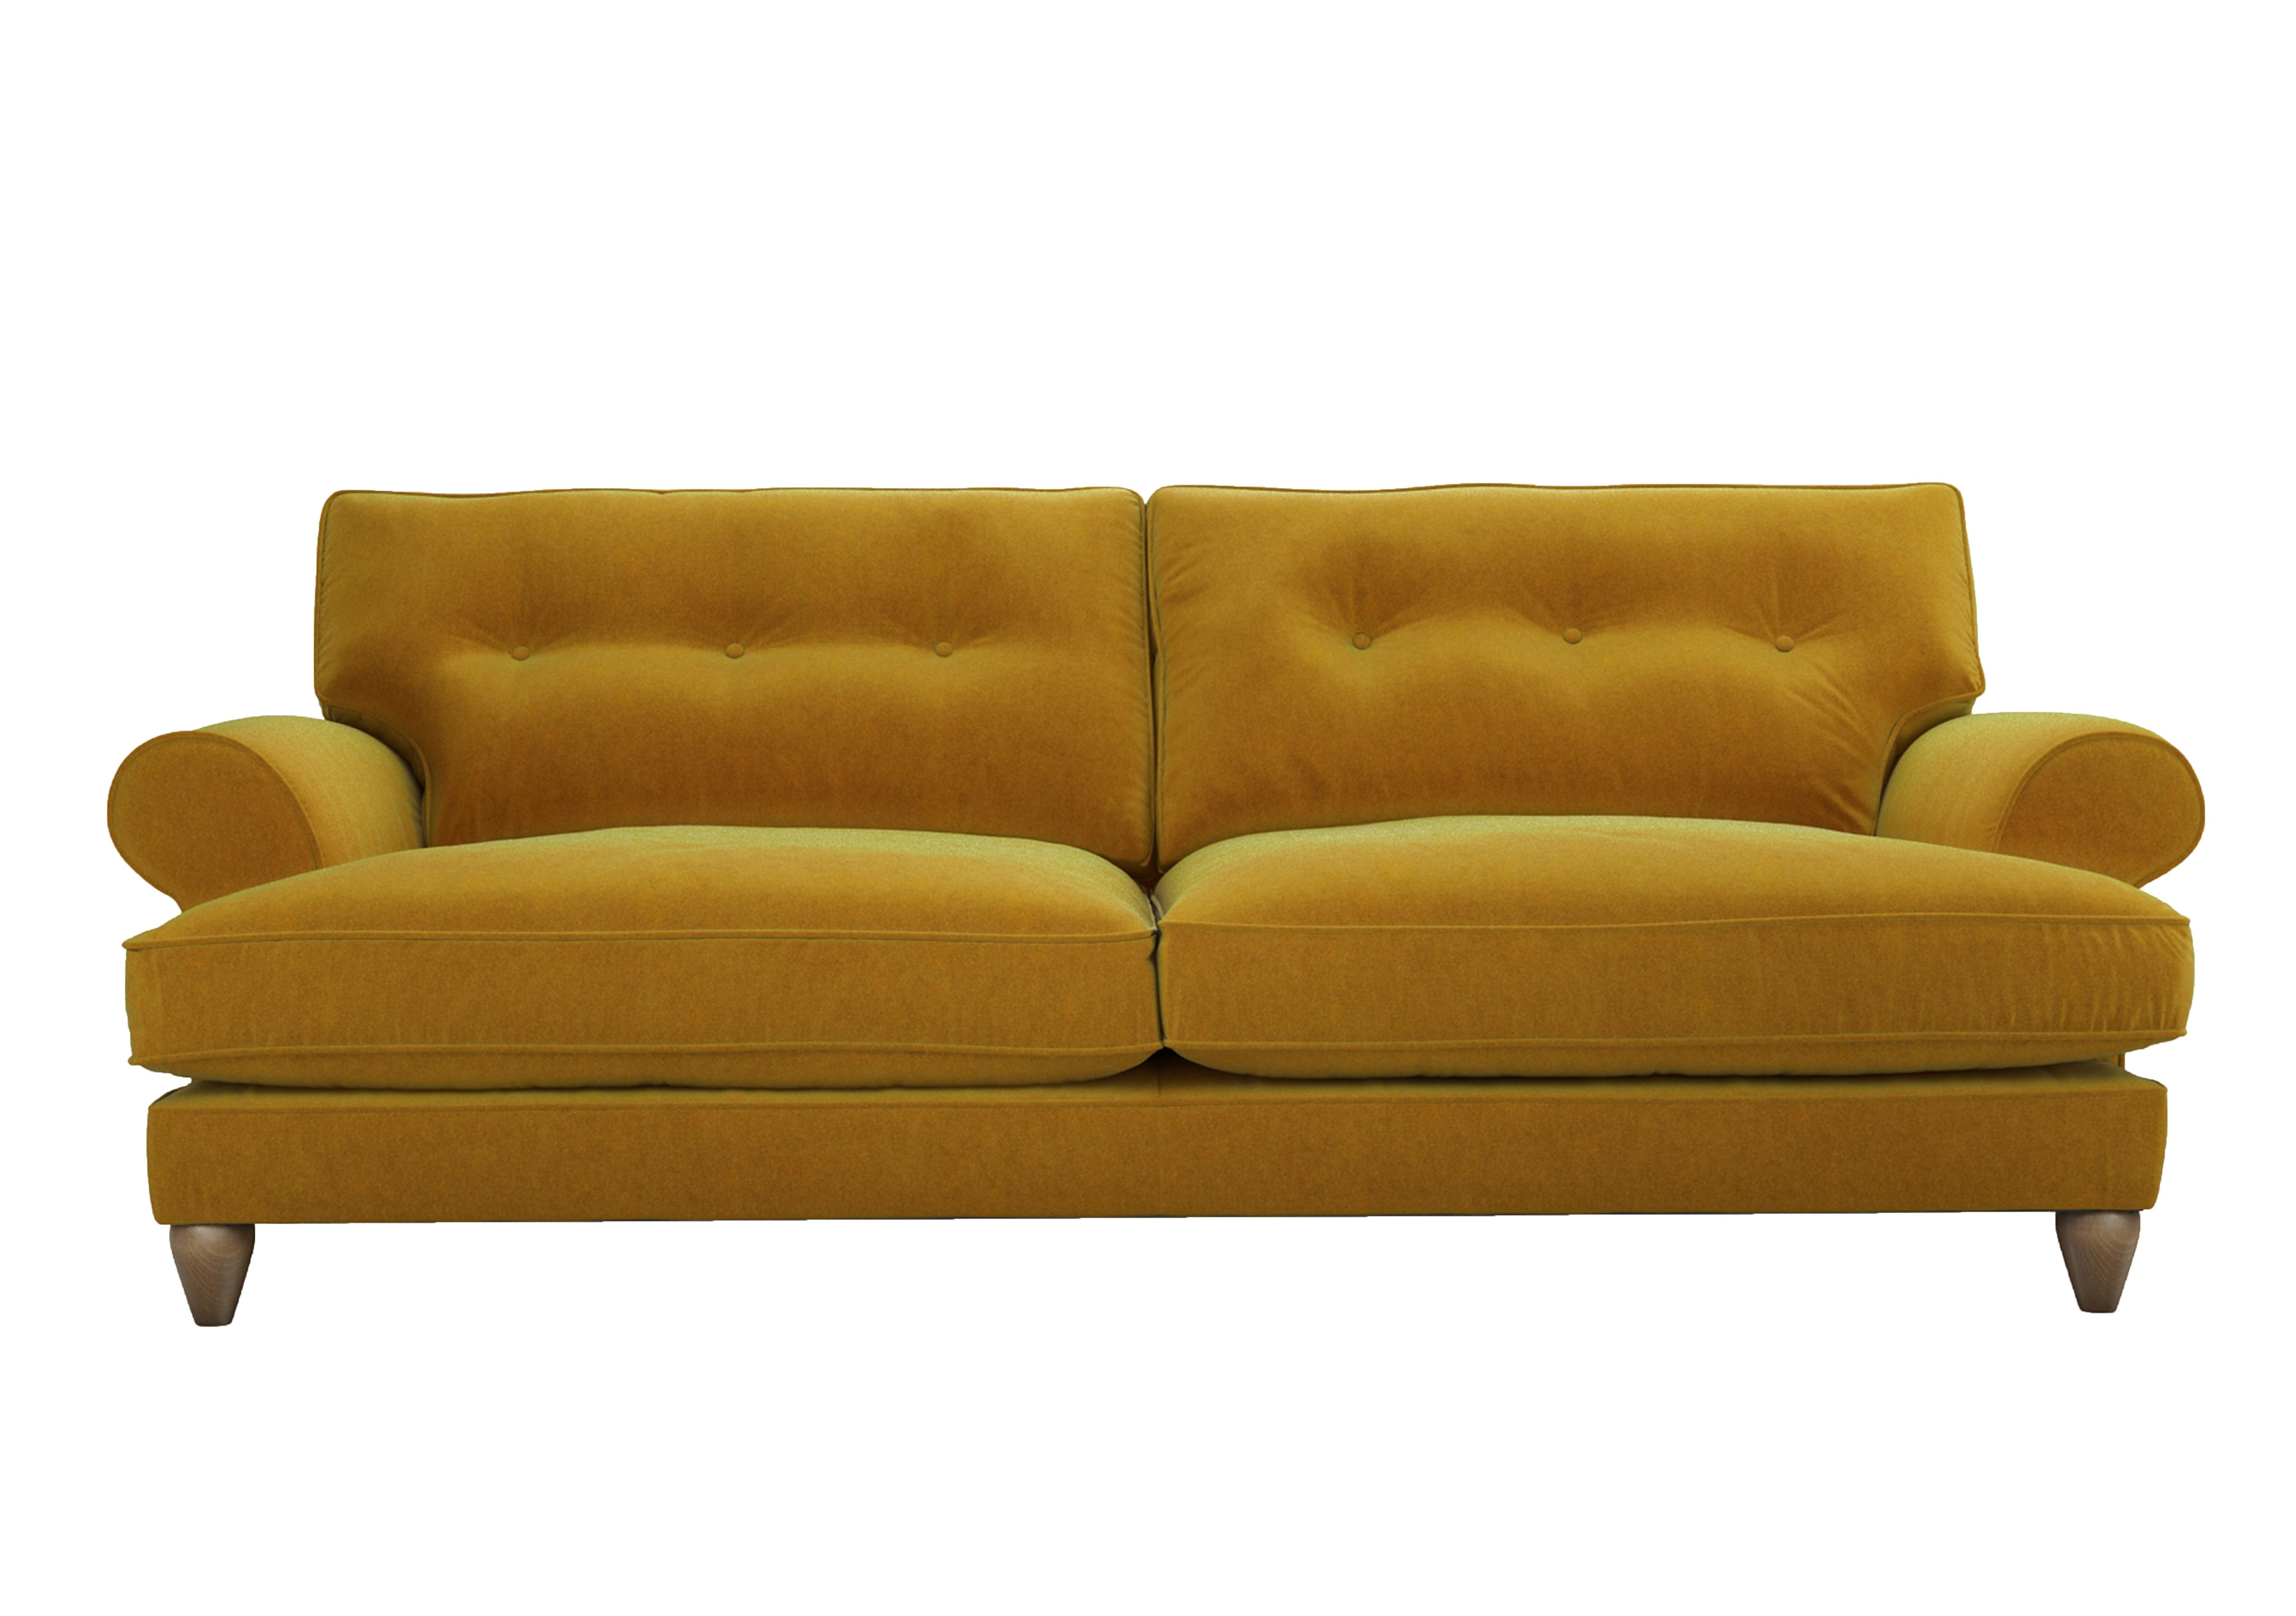 Bronwyn 4 Seater Fabric Classic Back Sofa in Gol204 Golden Spice on Furniture Village